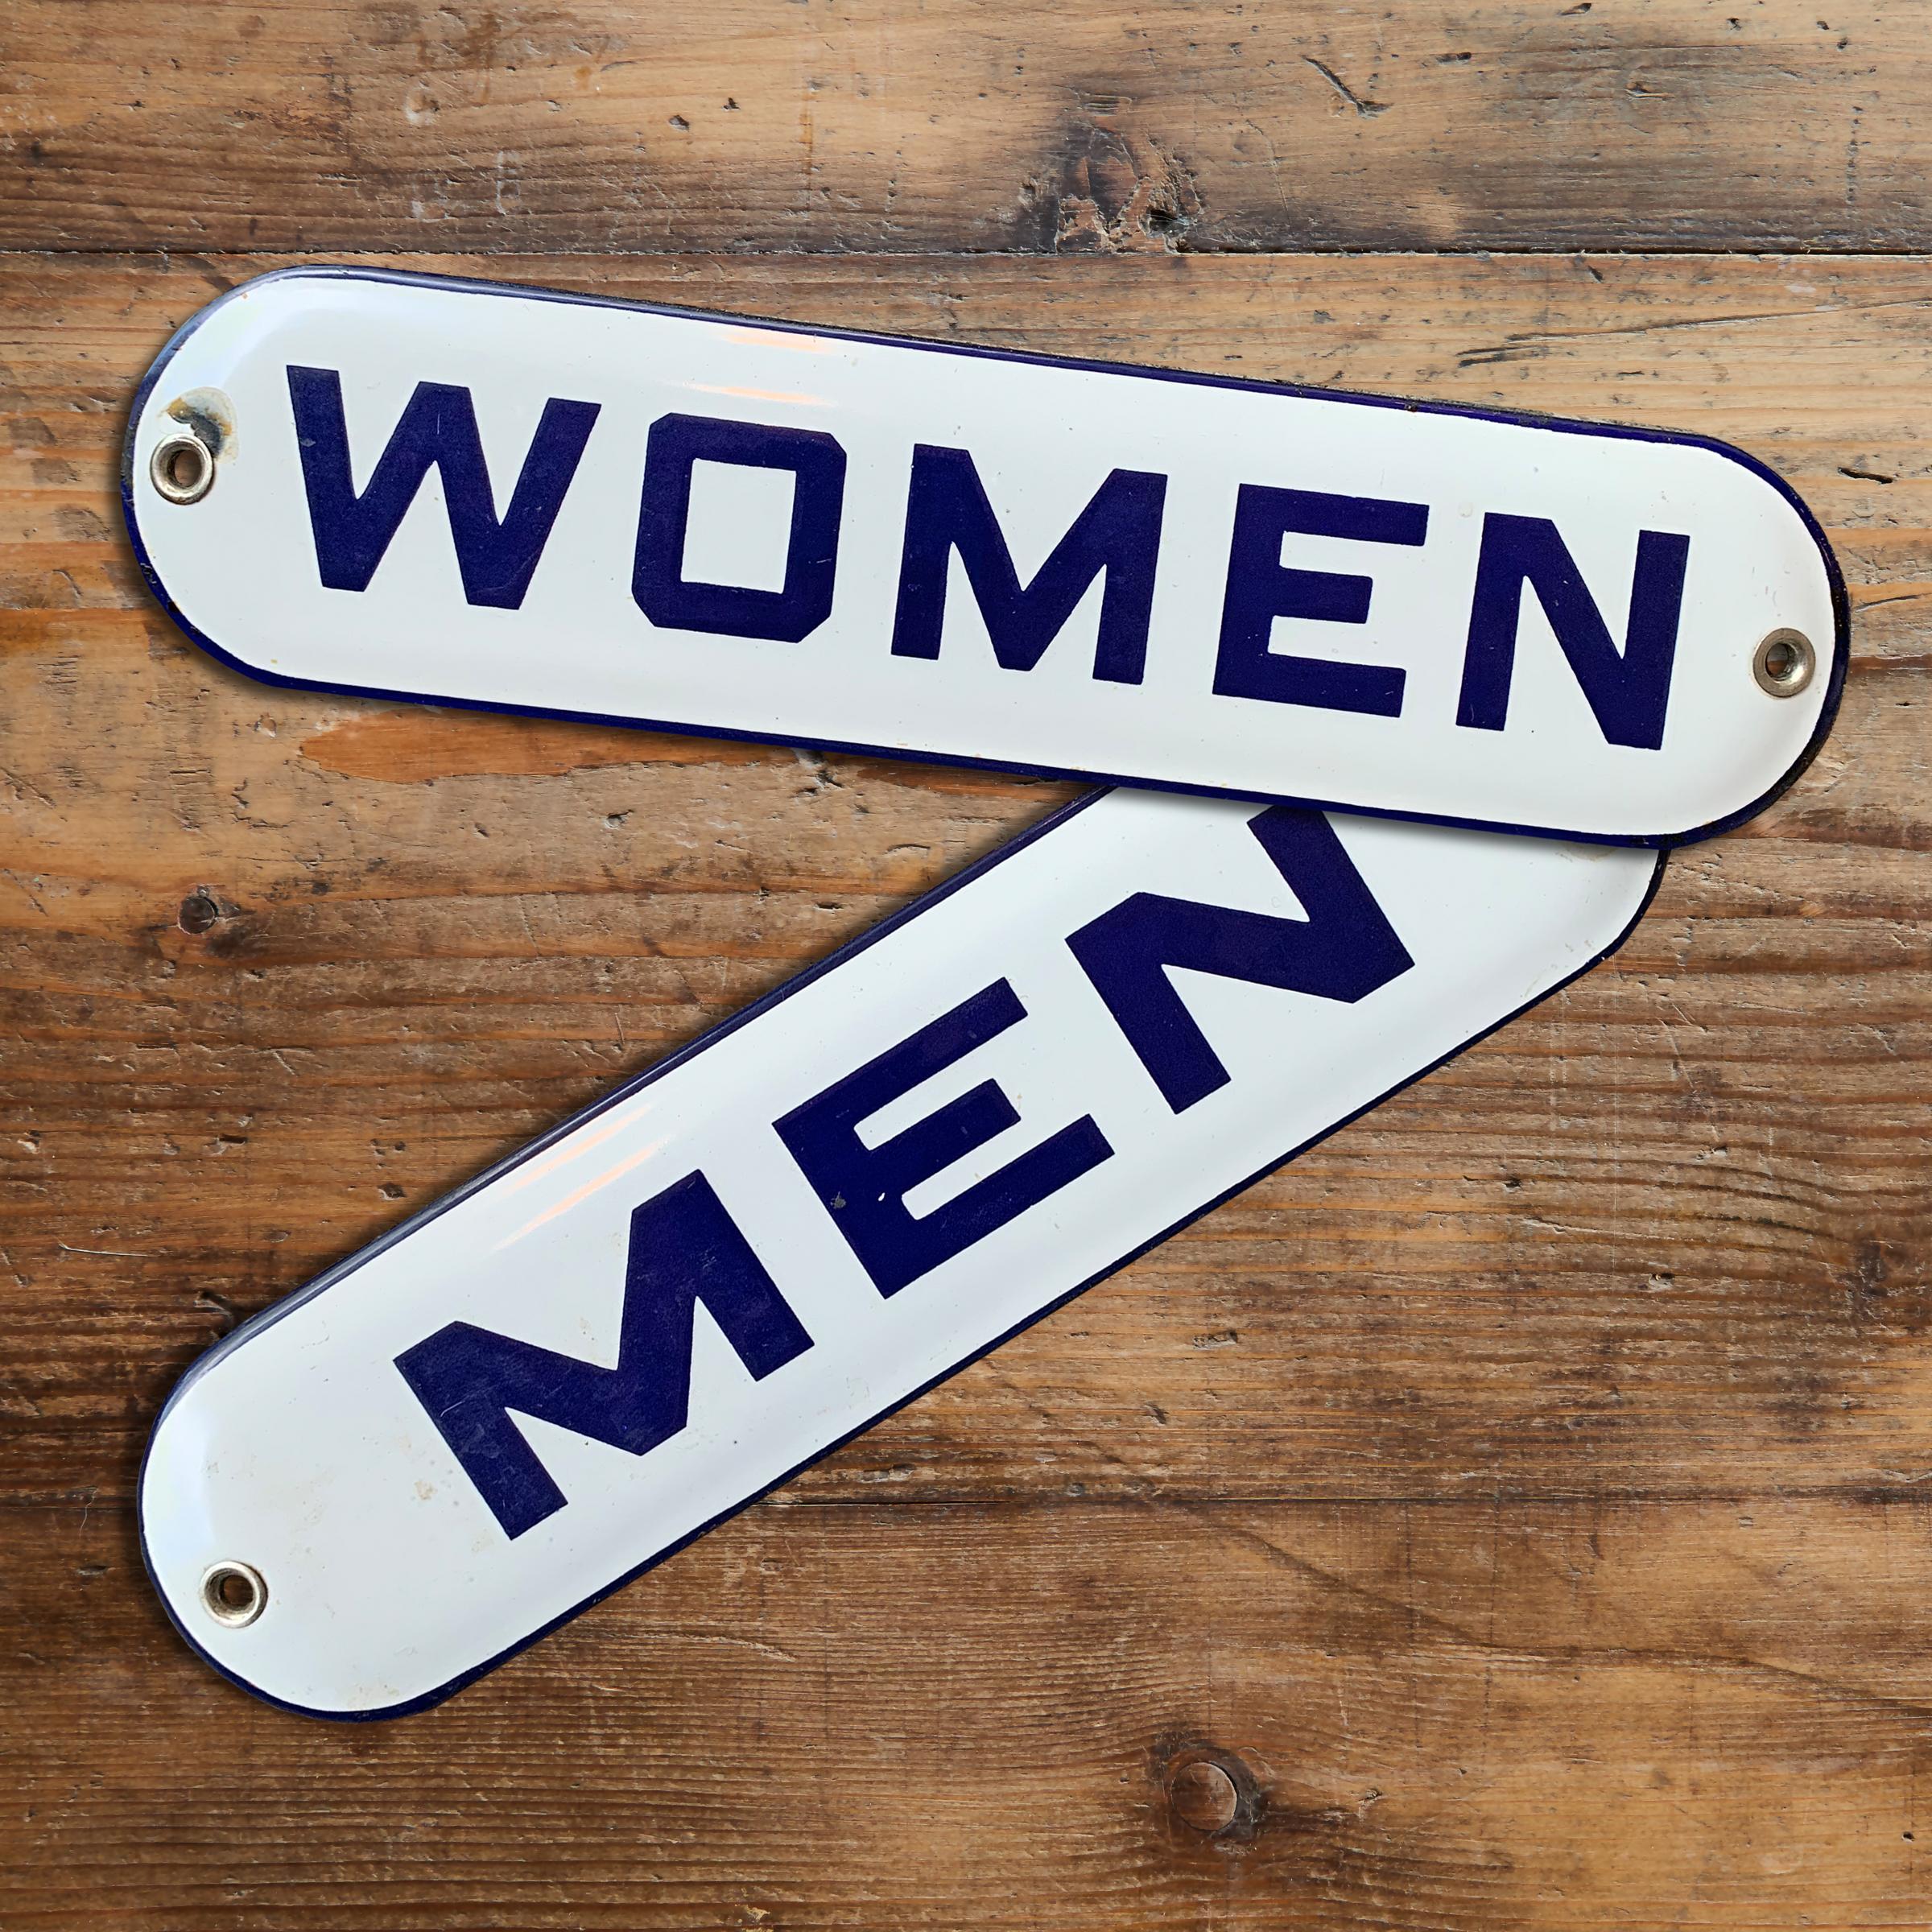 A pair of vintage American porcelain enameled iron restroom signs with large blue block letters against white backgrounds.